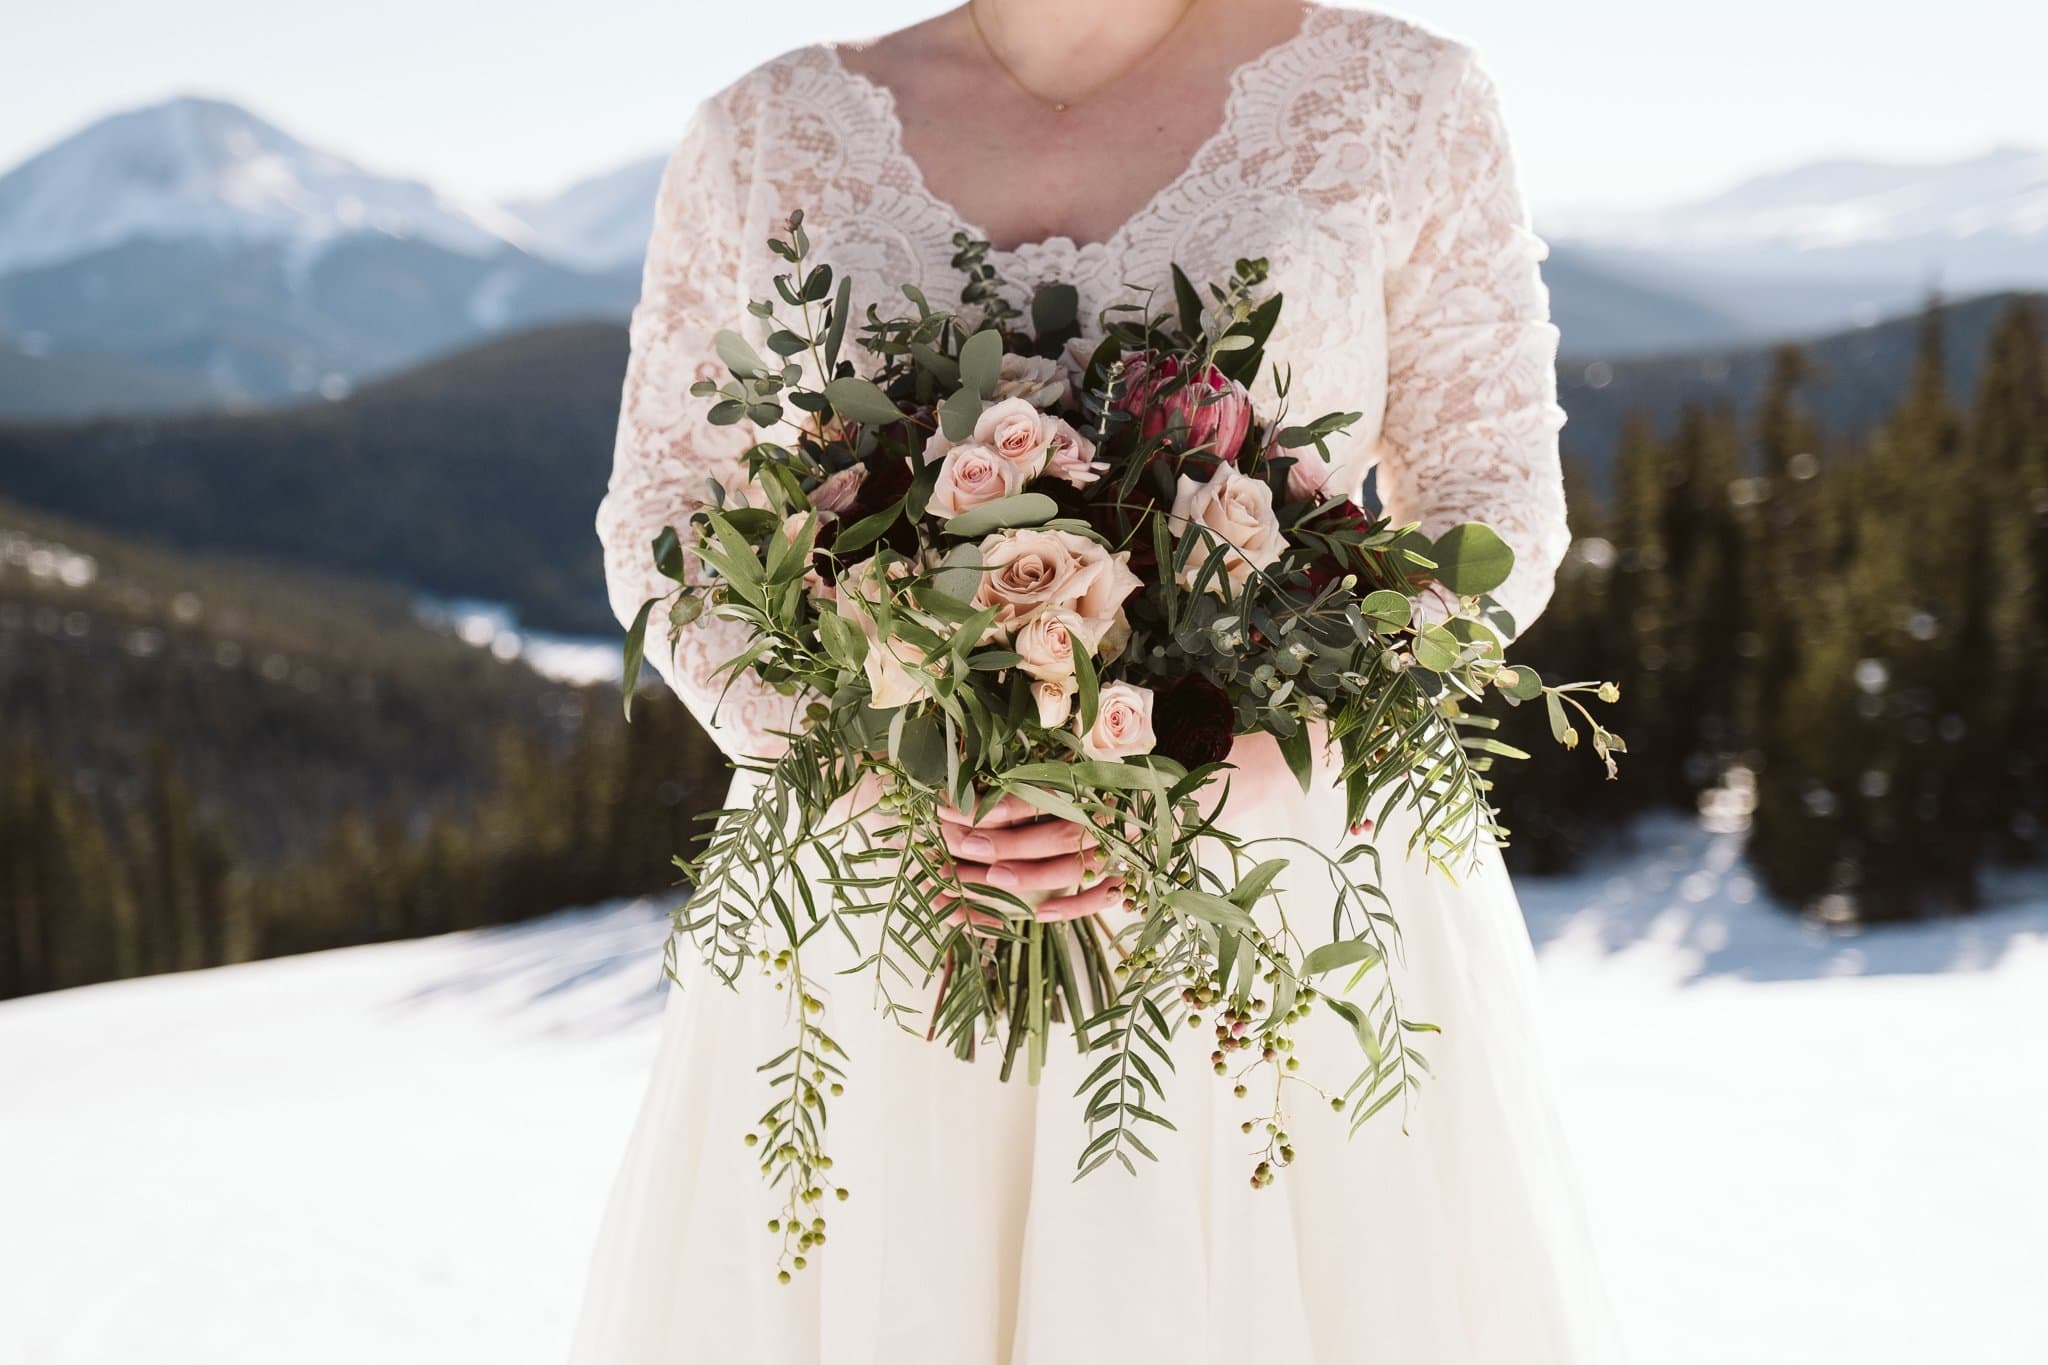 Bride with long sleeve lace wedding dress at winter wedding, holding modern green bouquet with pink and purple flowers.